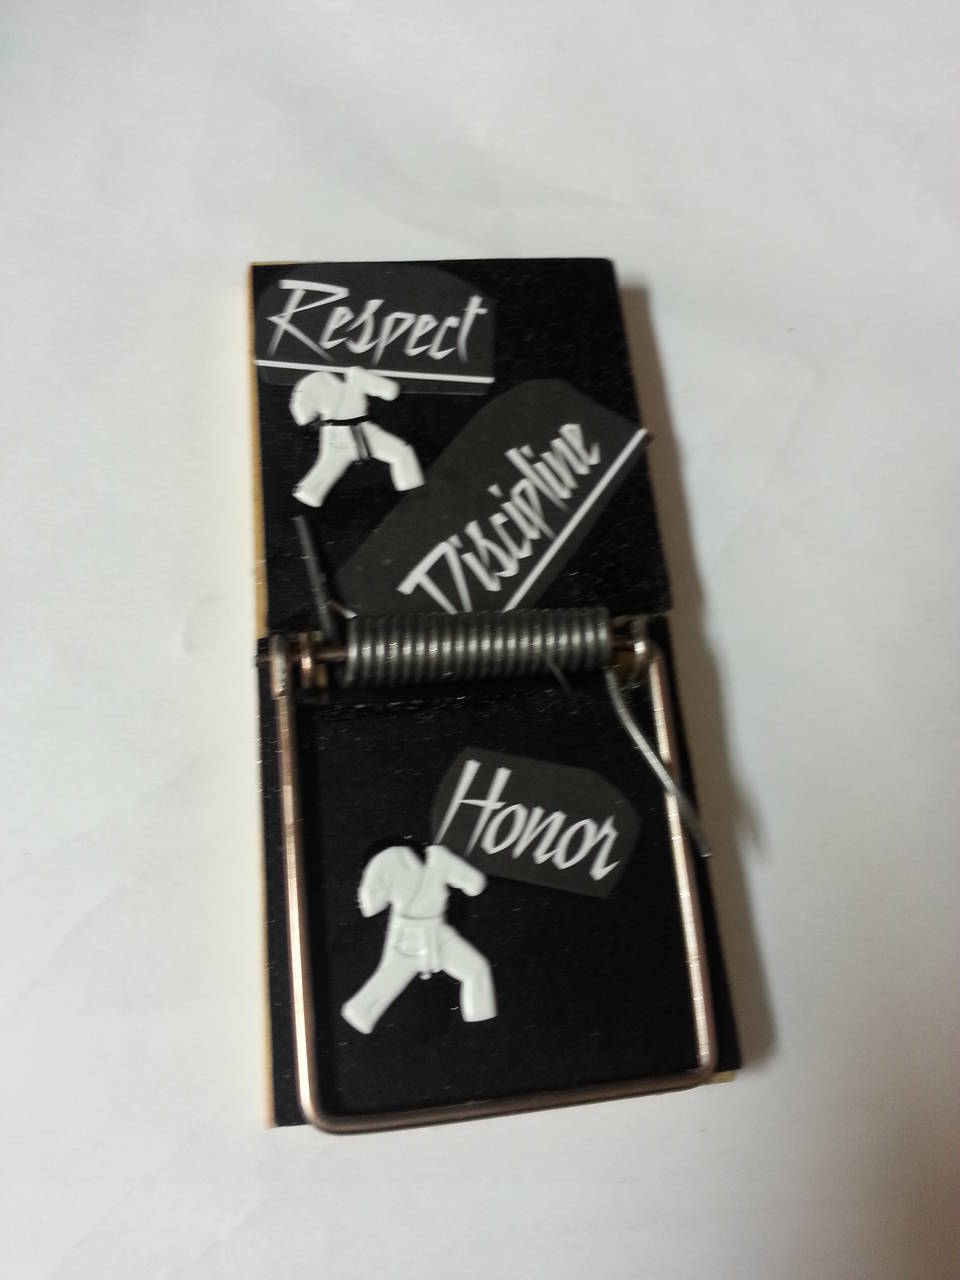 Tae Kwon Do Gift Card holder with a mouse trap